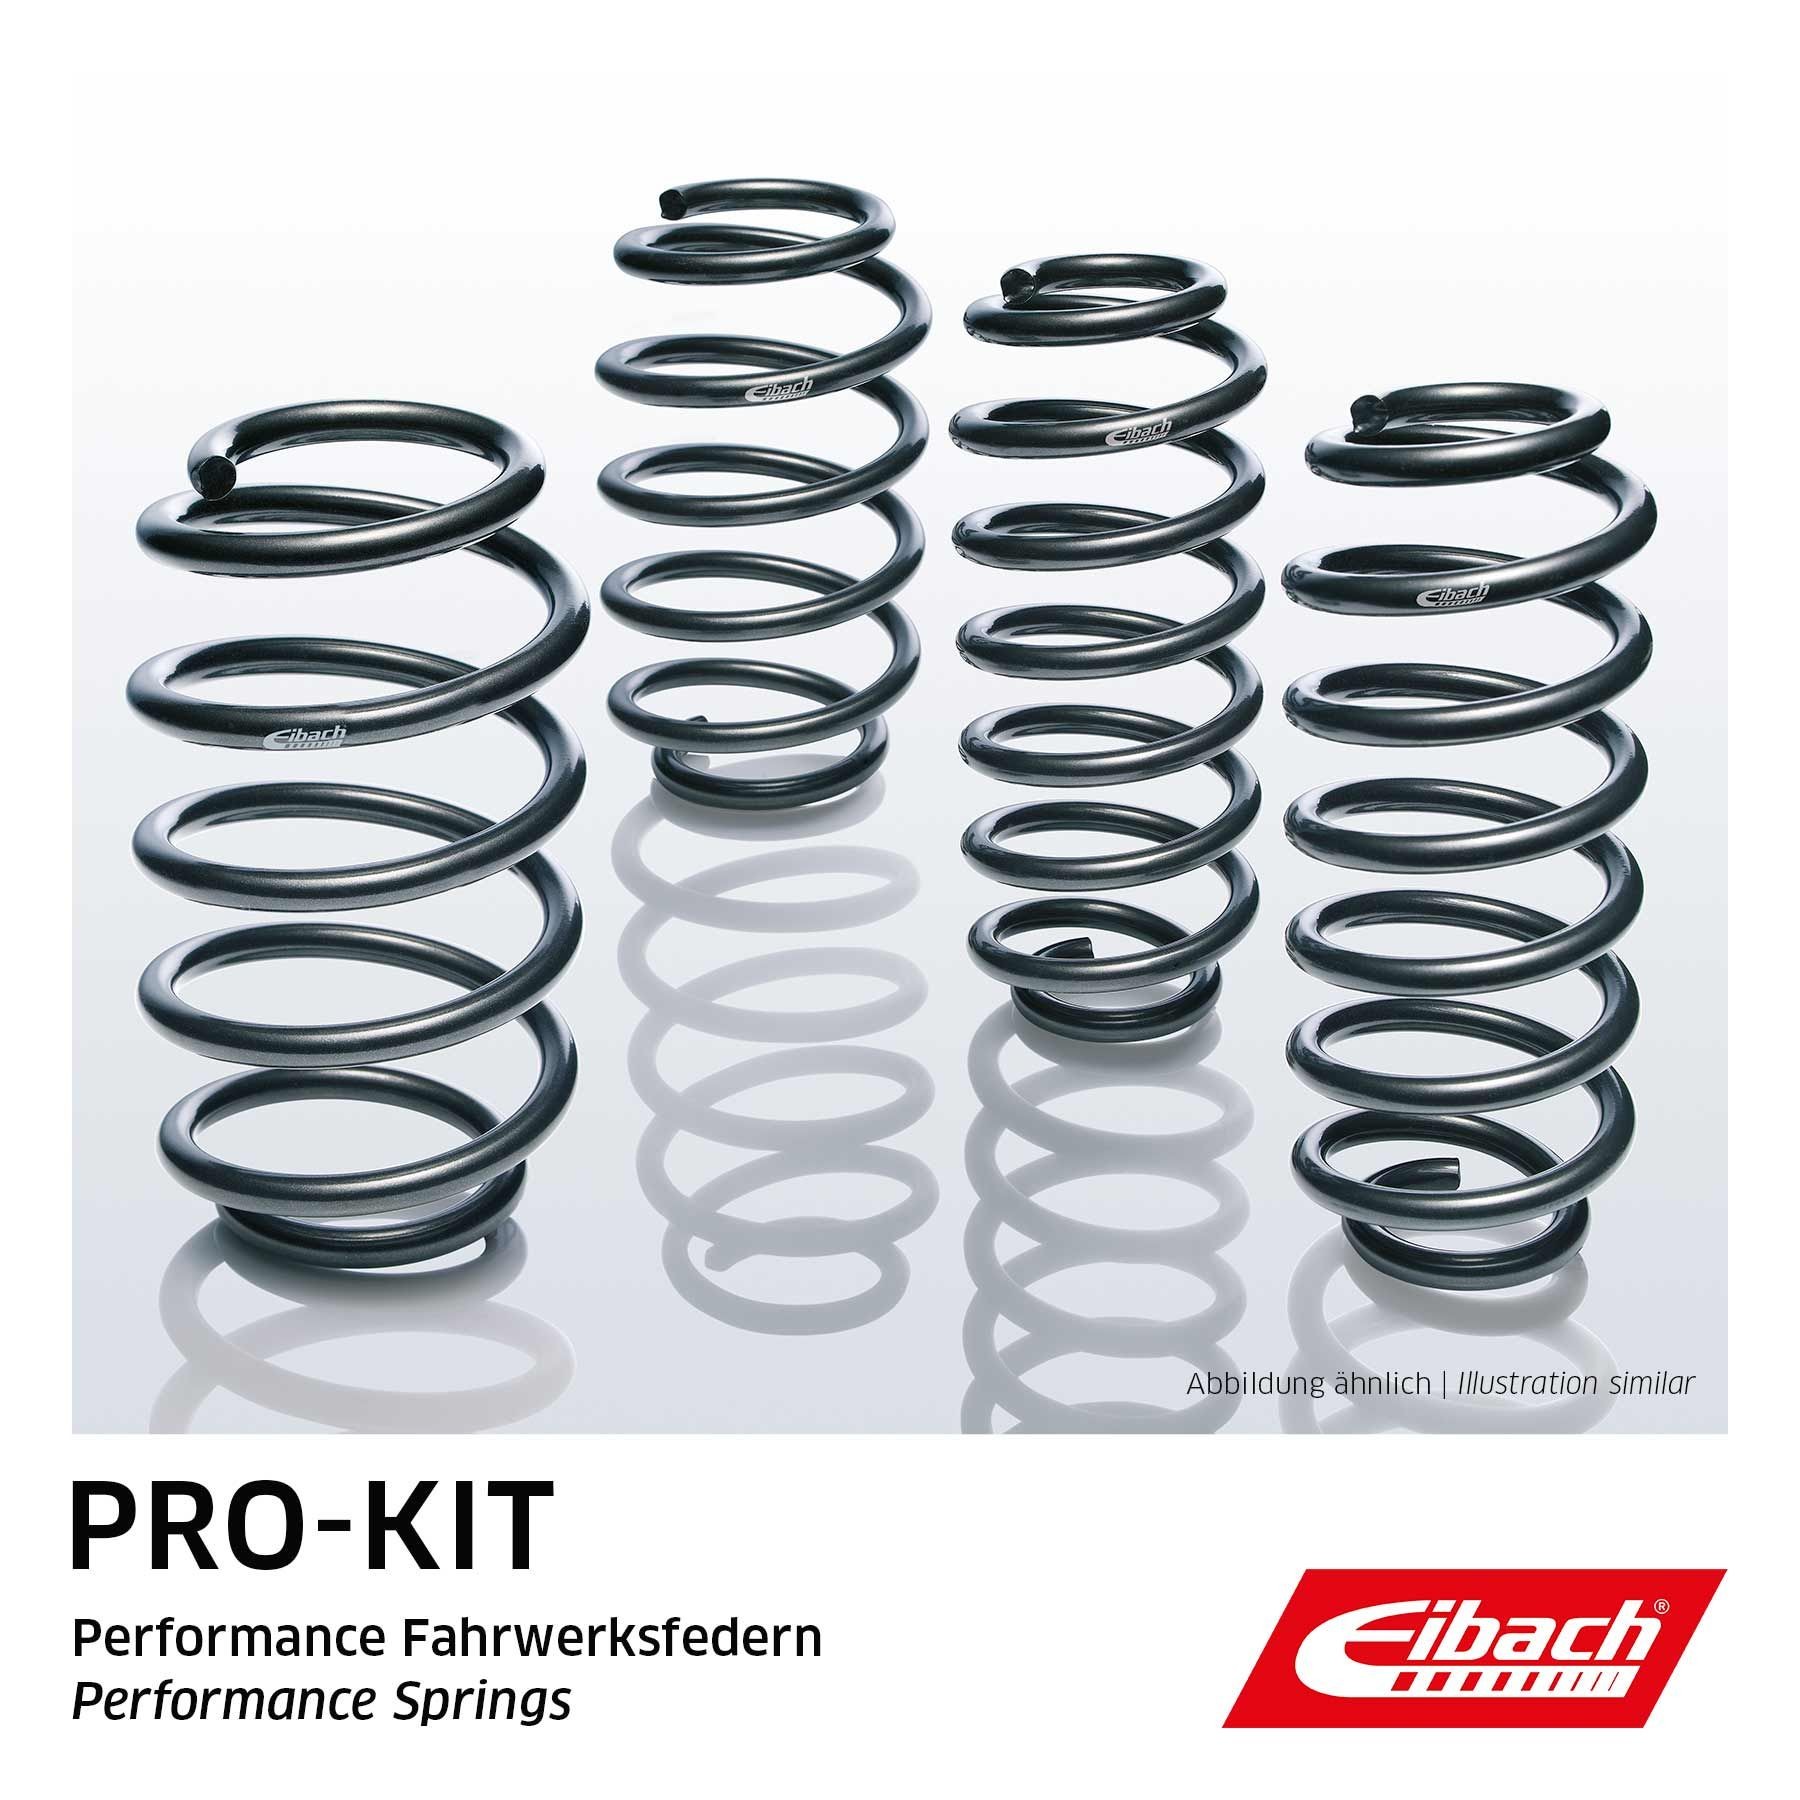 Volkswagen ID.3 Damping parts - Suspension kit, coil springs EIBACH E10-11-001-01-22